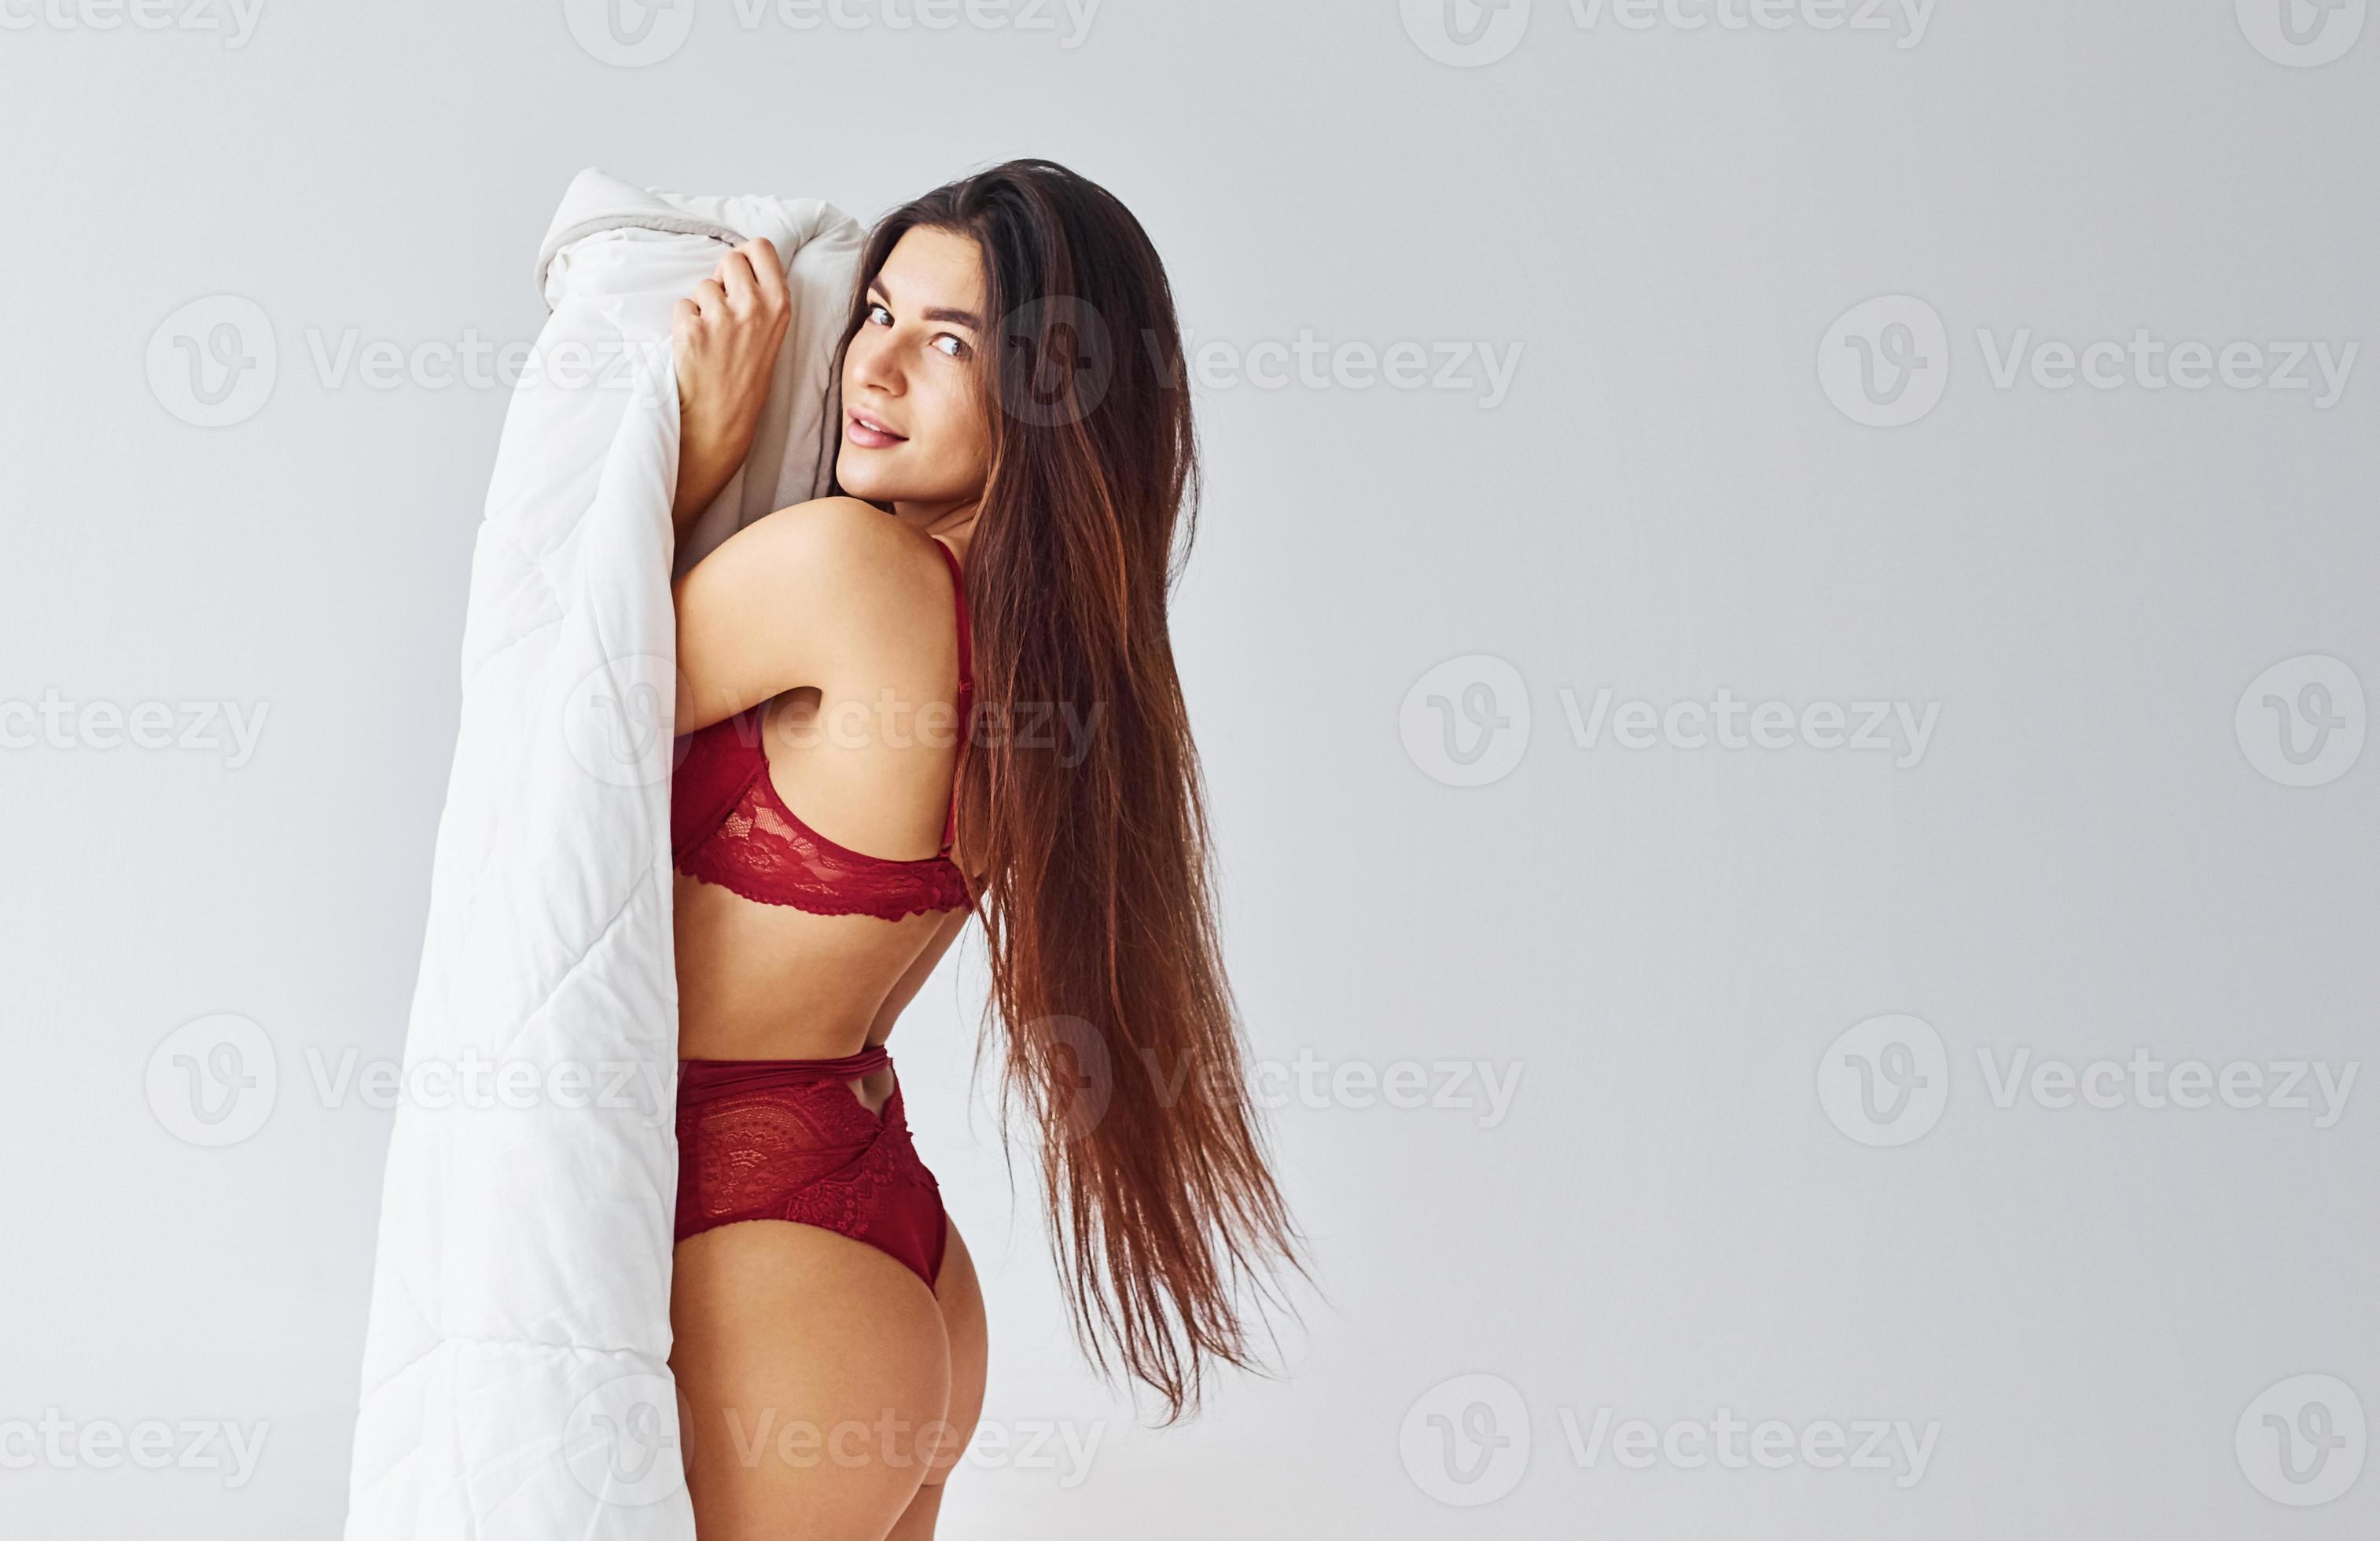 Woman in red underwear covering her body by towel in the studio